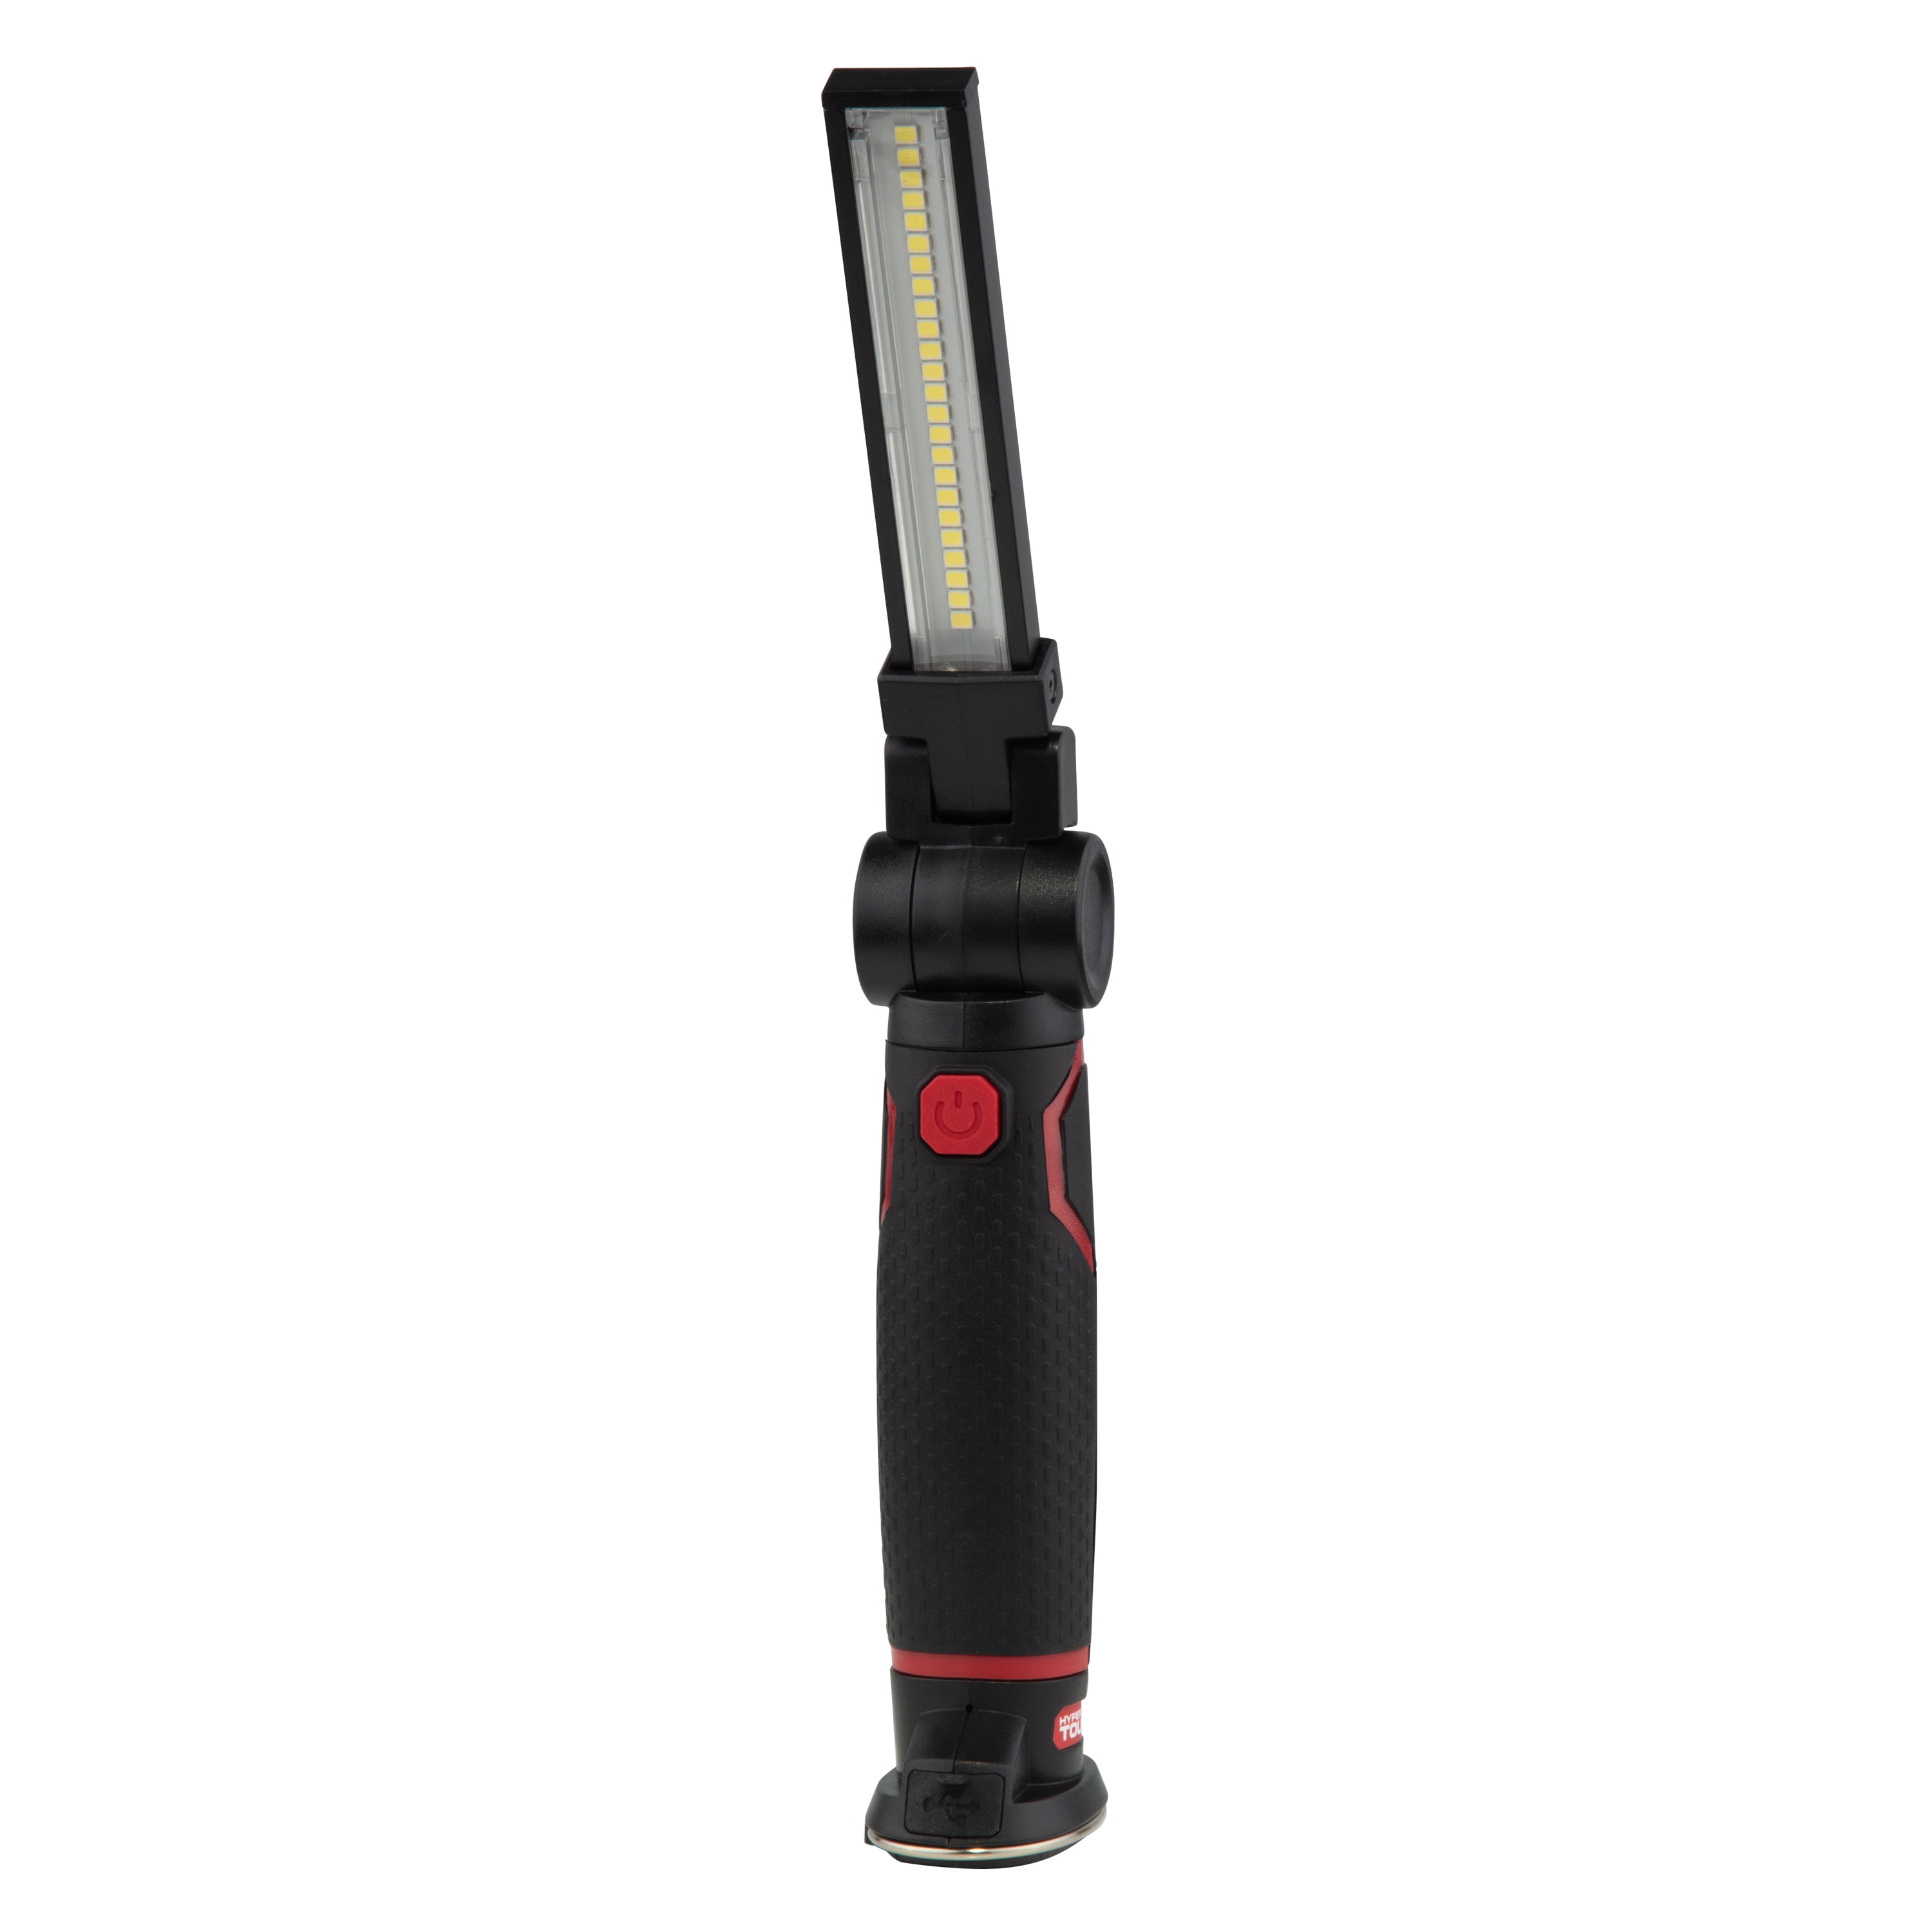 Hyper Tough LED Rechargeable Work Light with Magnetic Base, 600 Lumens 